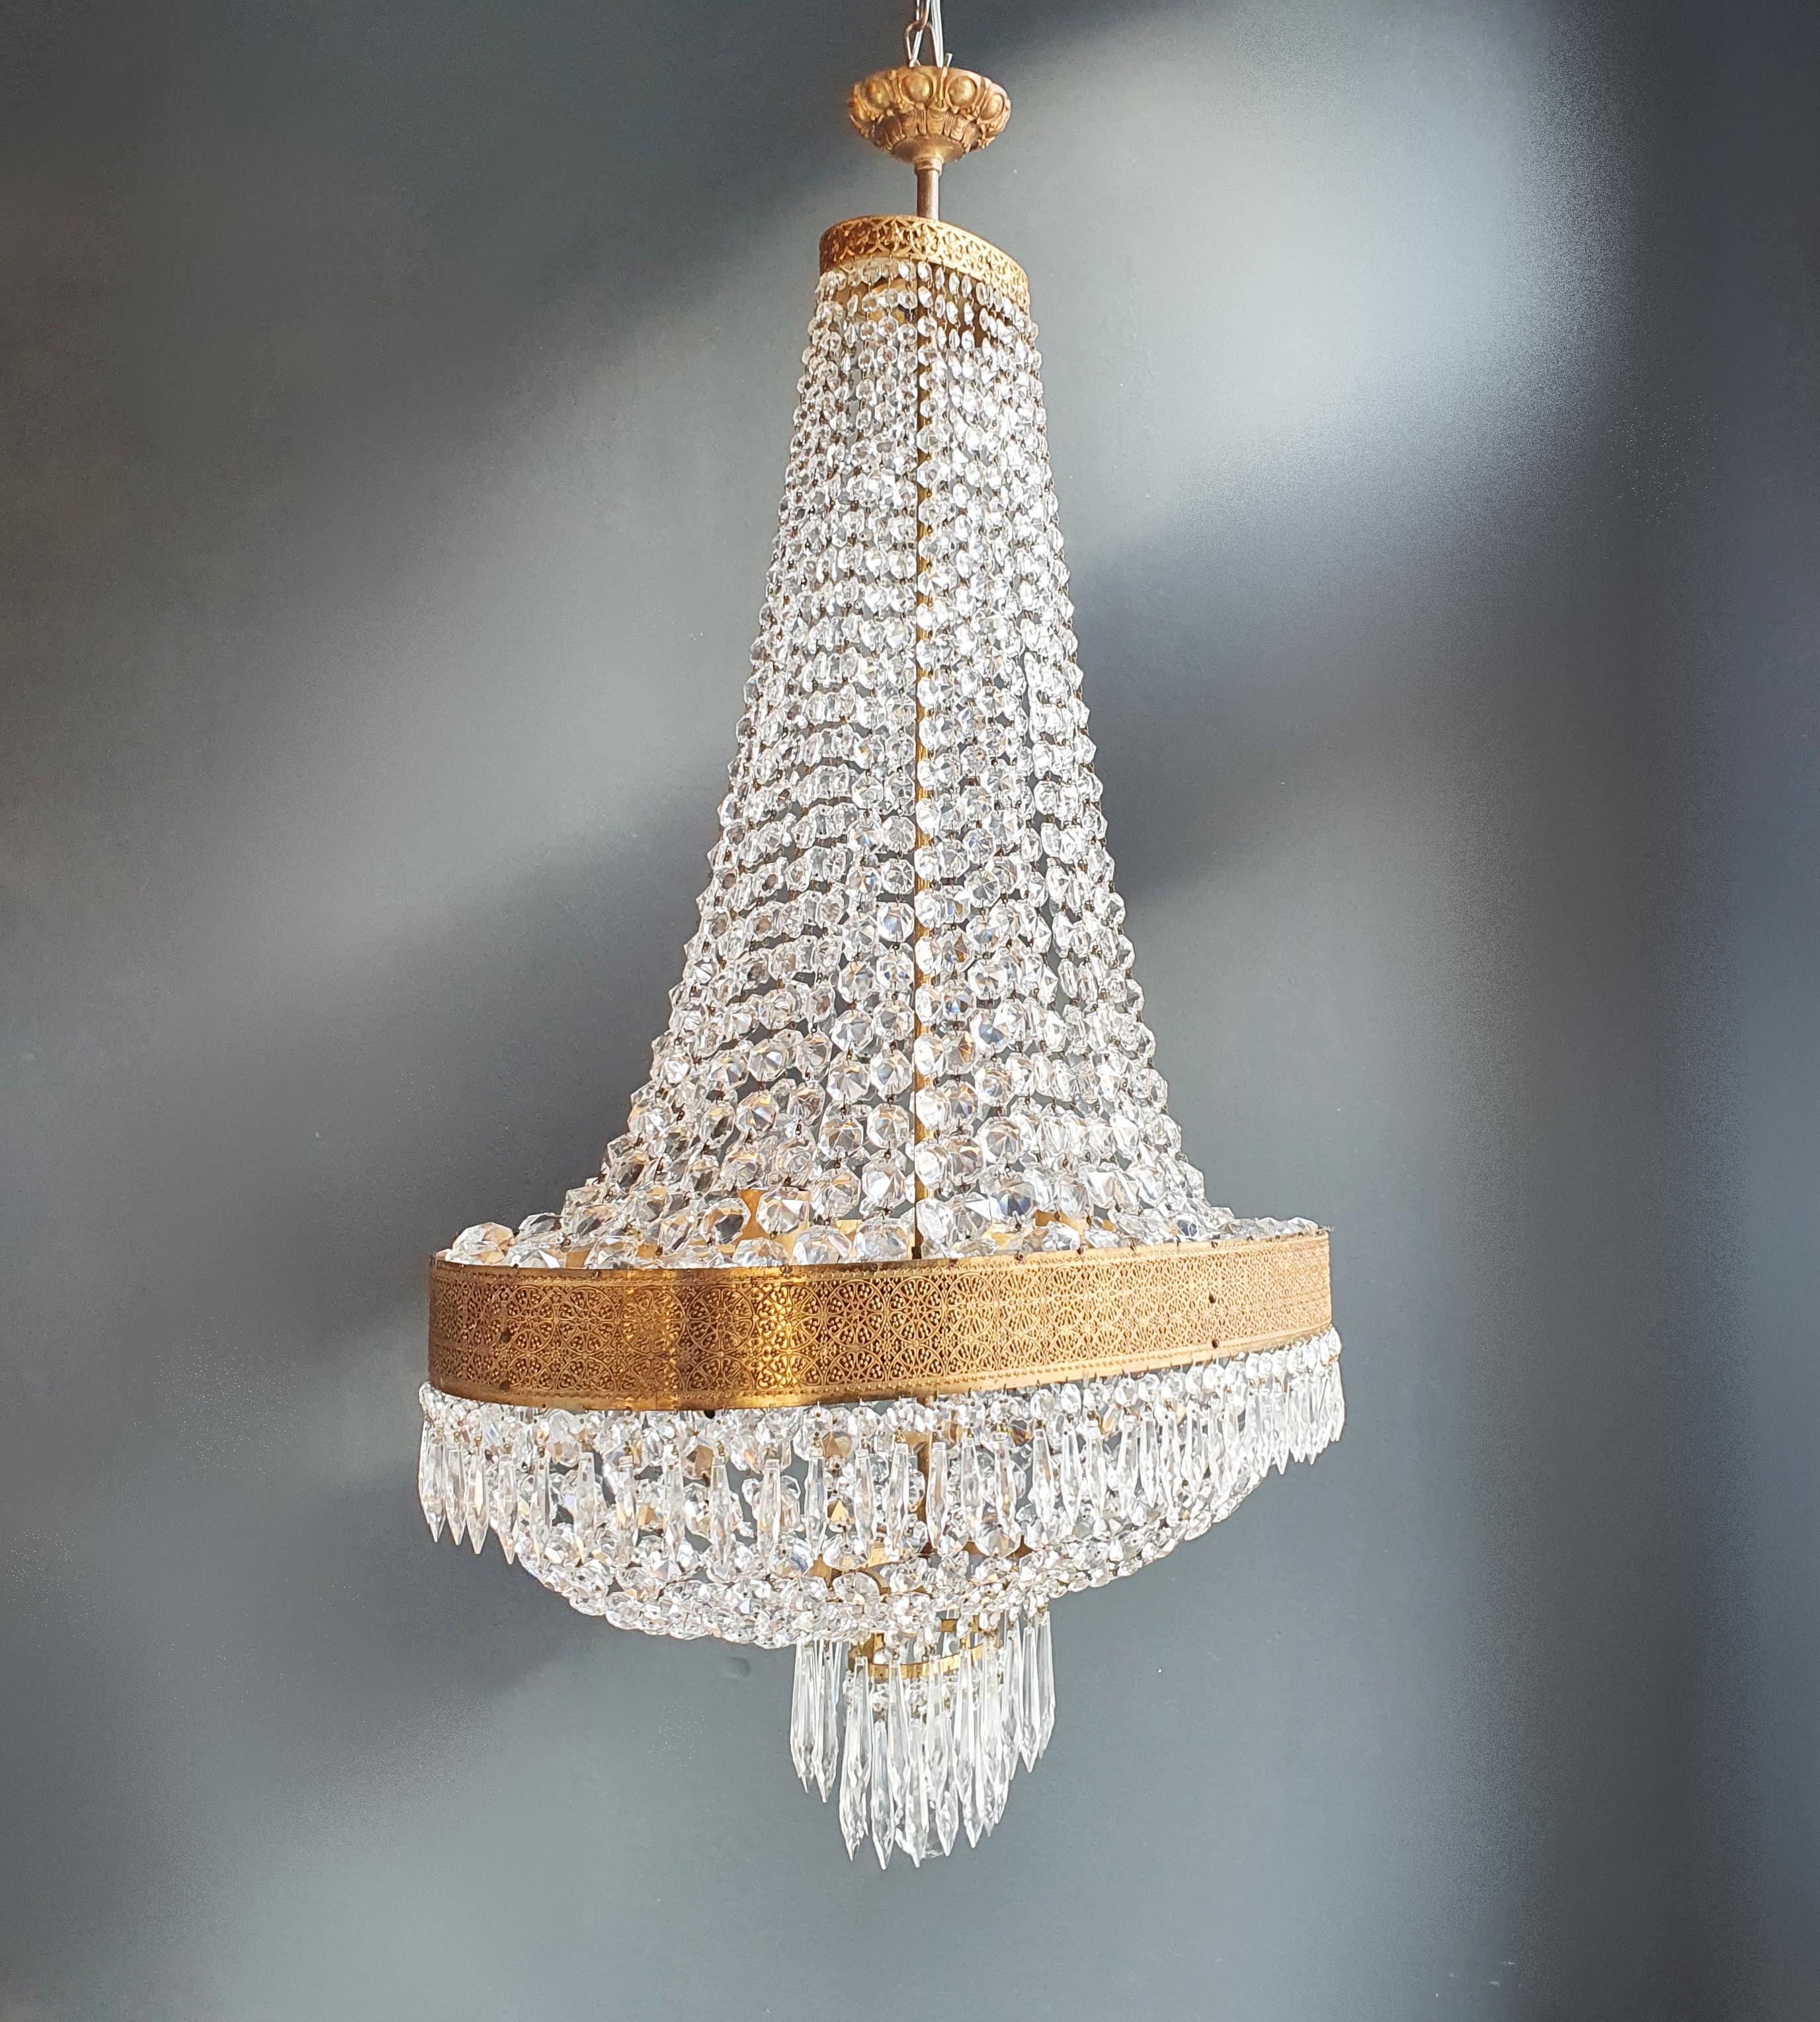 Oval Montgolfiè Empire Sac a Pearl Chandelier Crystal Lustre Ceiling Antique 3